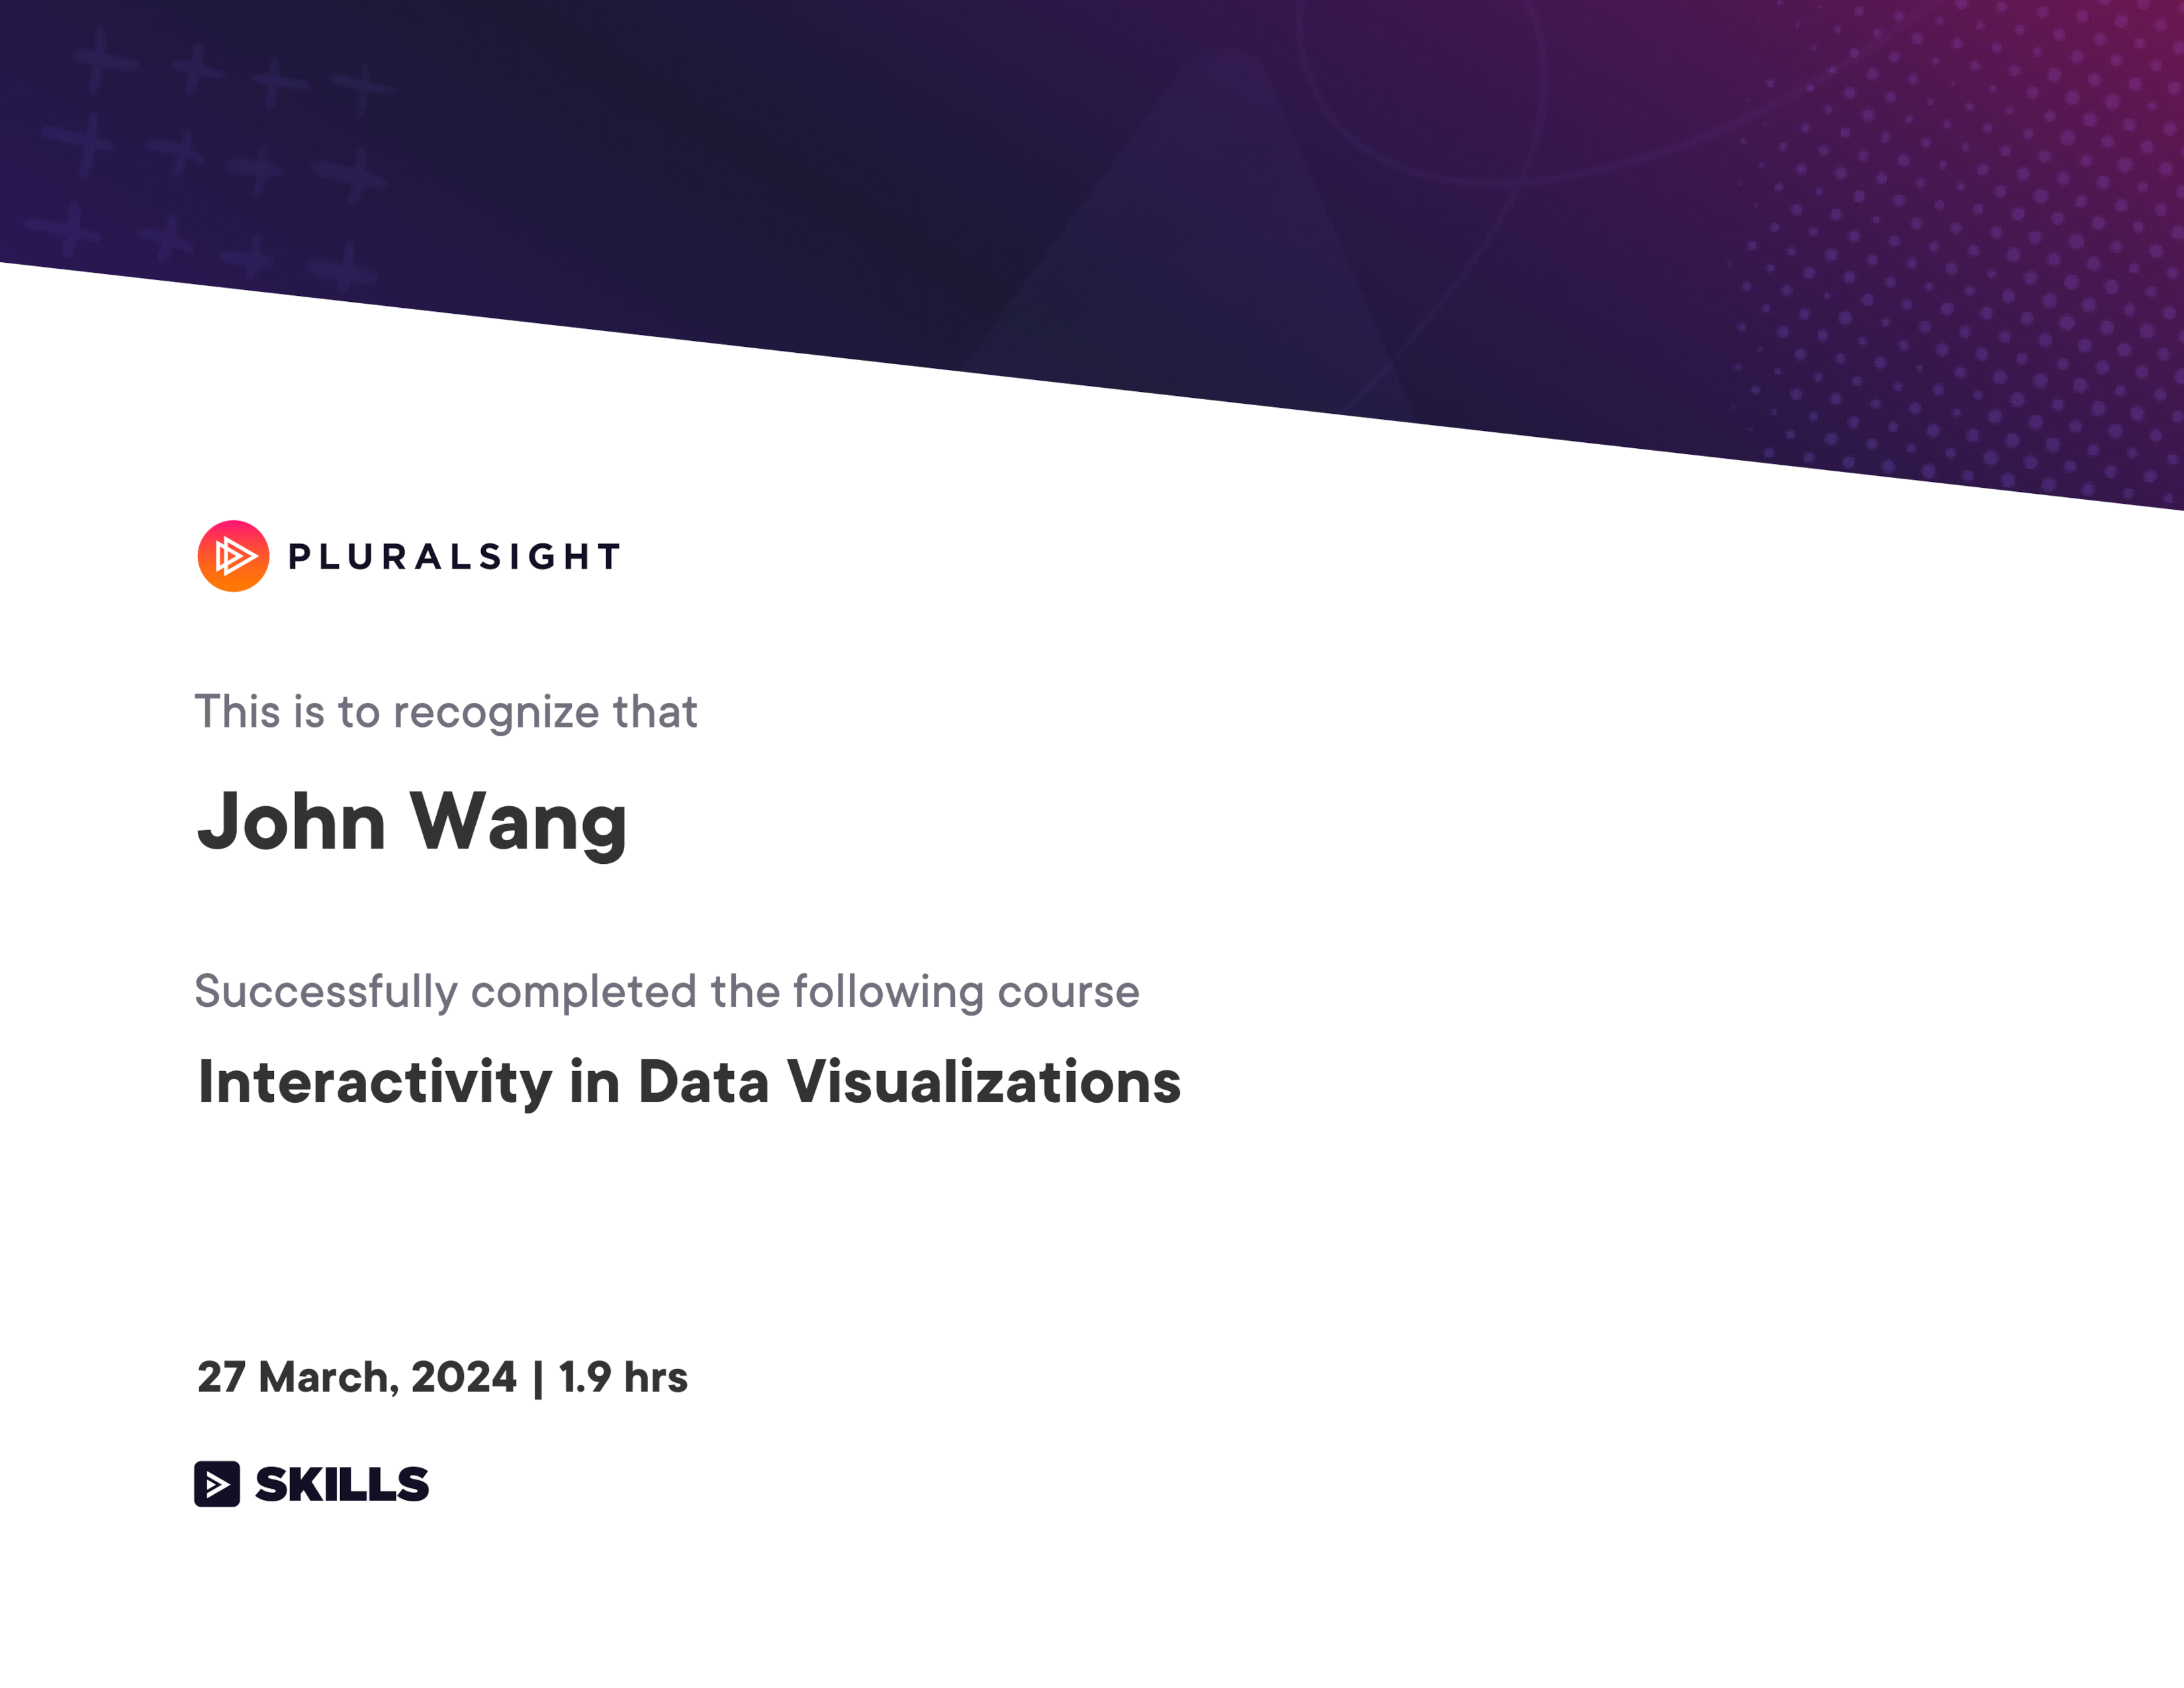 John's Interactivity in Data Visualizations from Pluralsight by Tiffany France